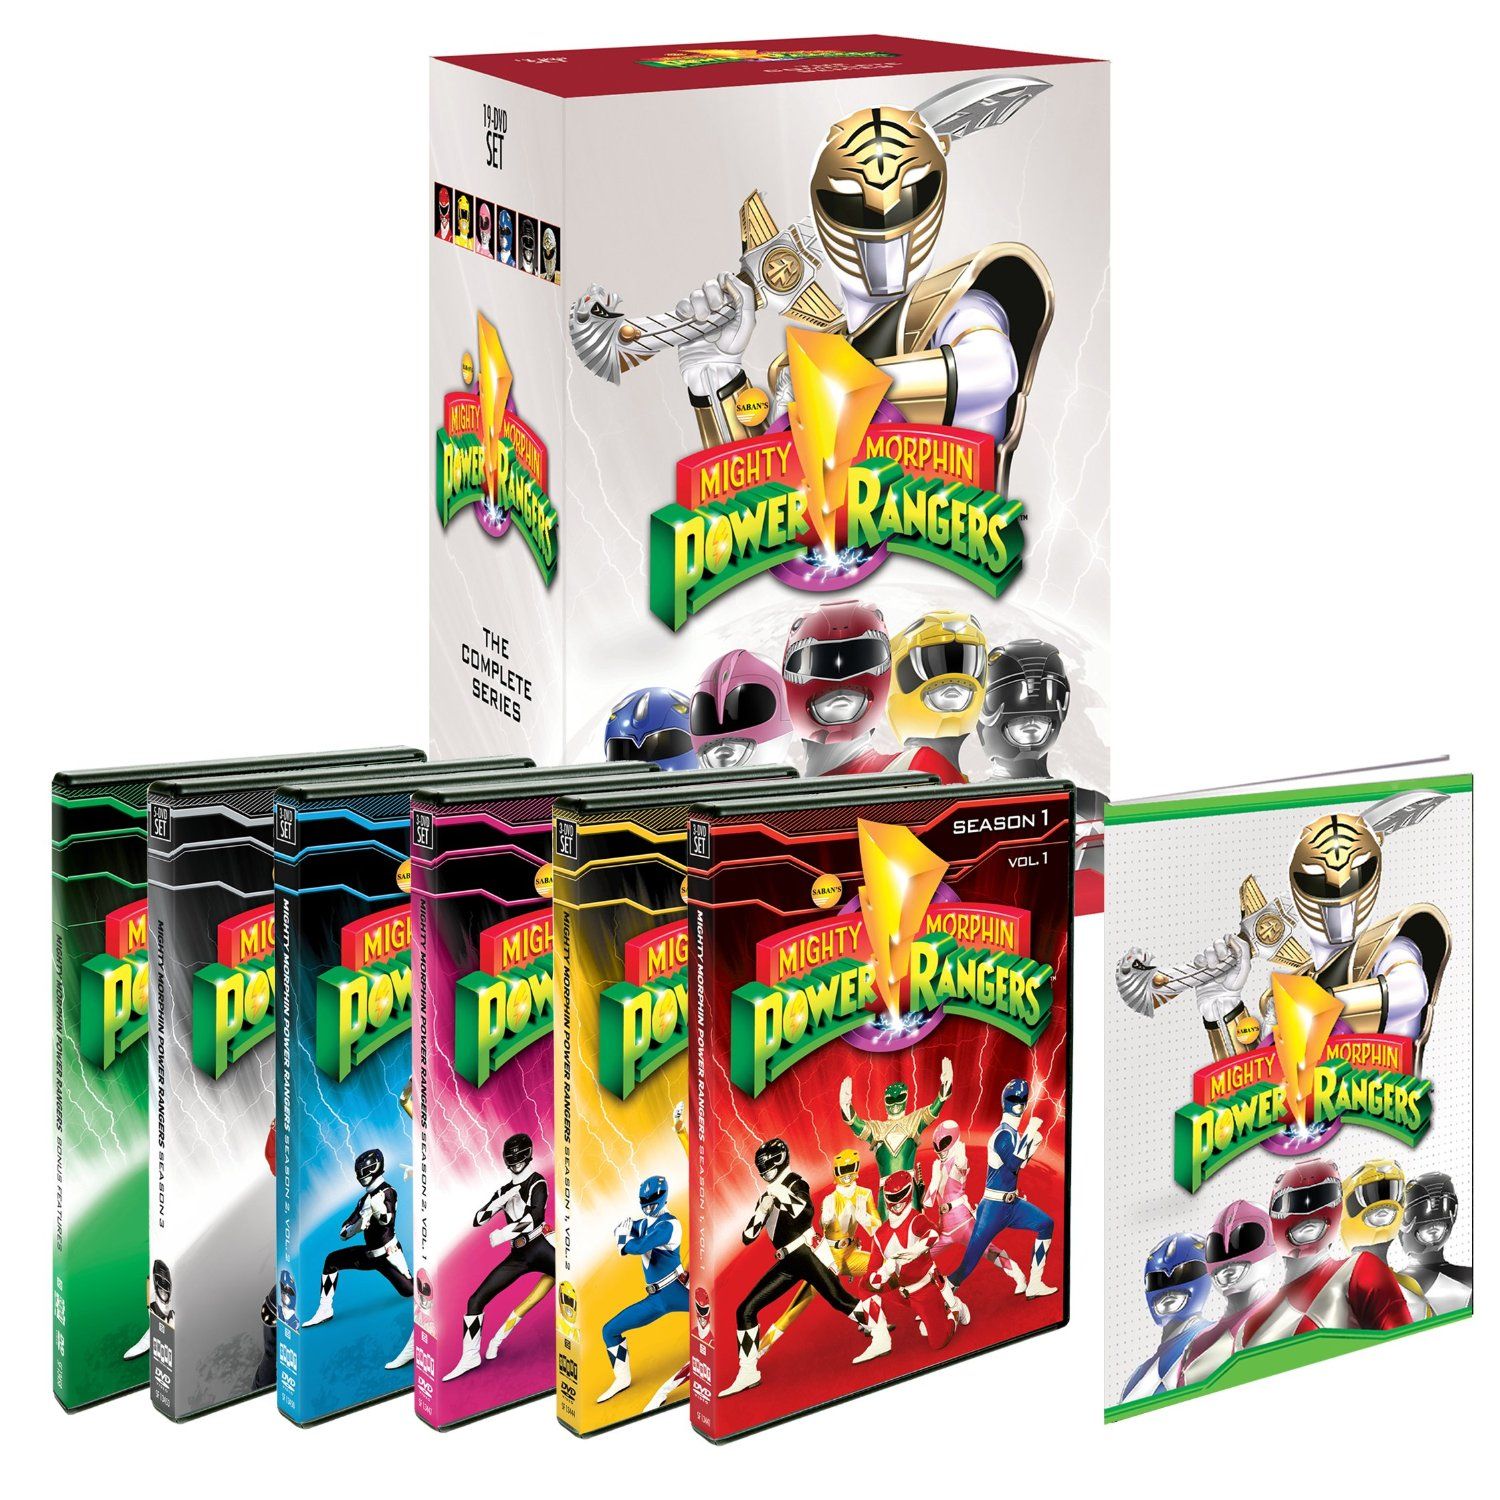 Mighty Morphin' Power Rangers Complete Series